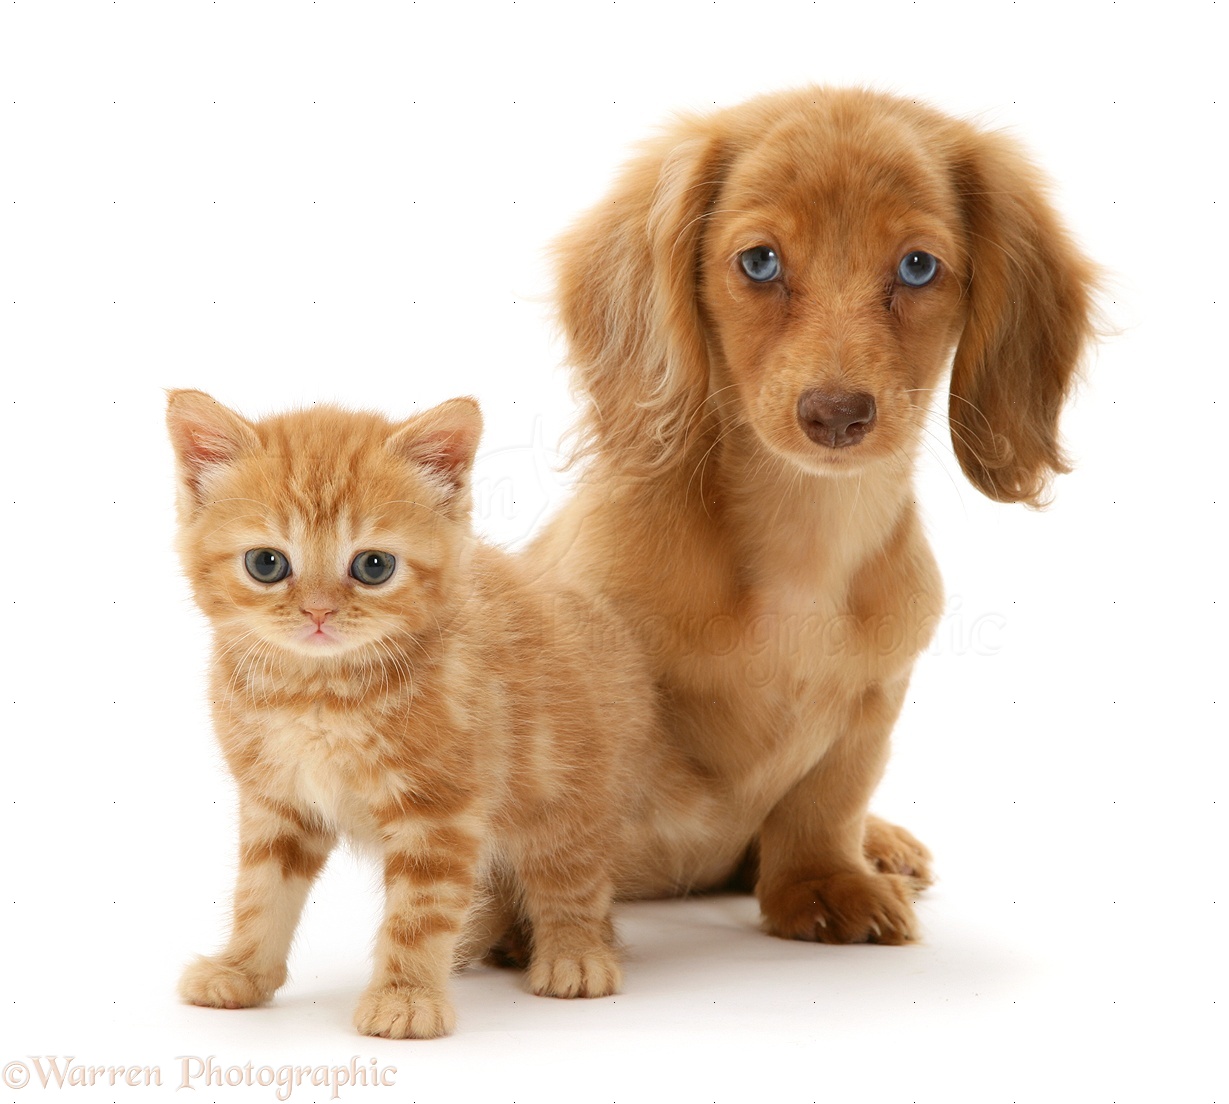 Pets: Dachshund pup and ginger kitten photo WP12751